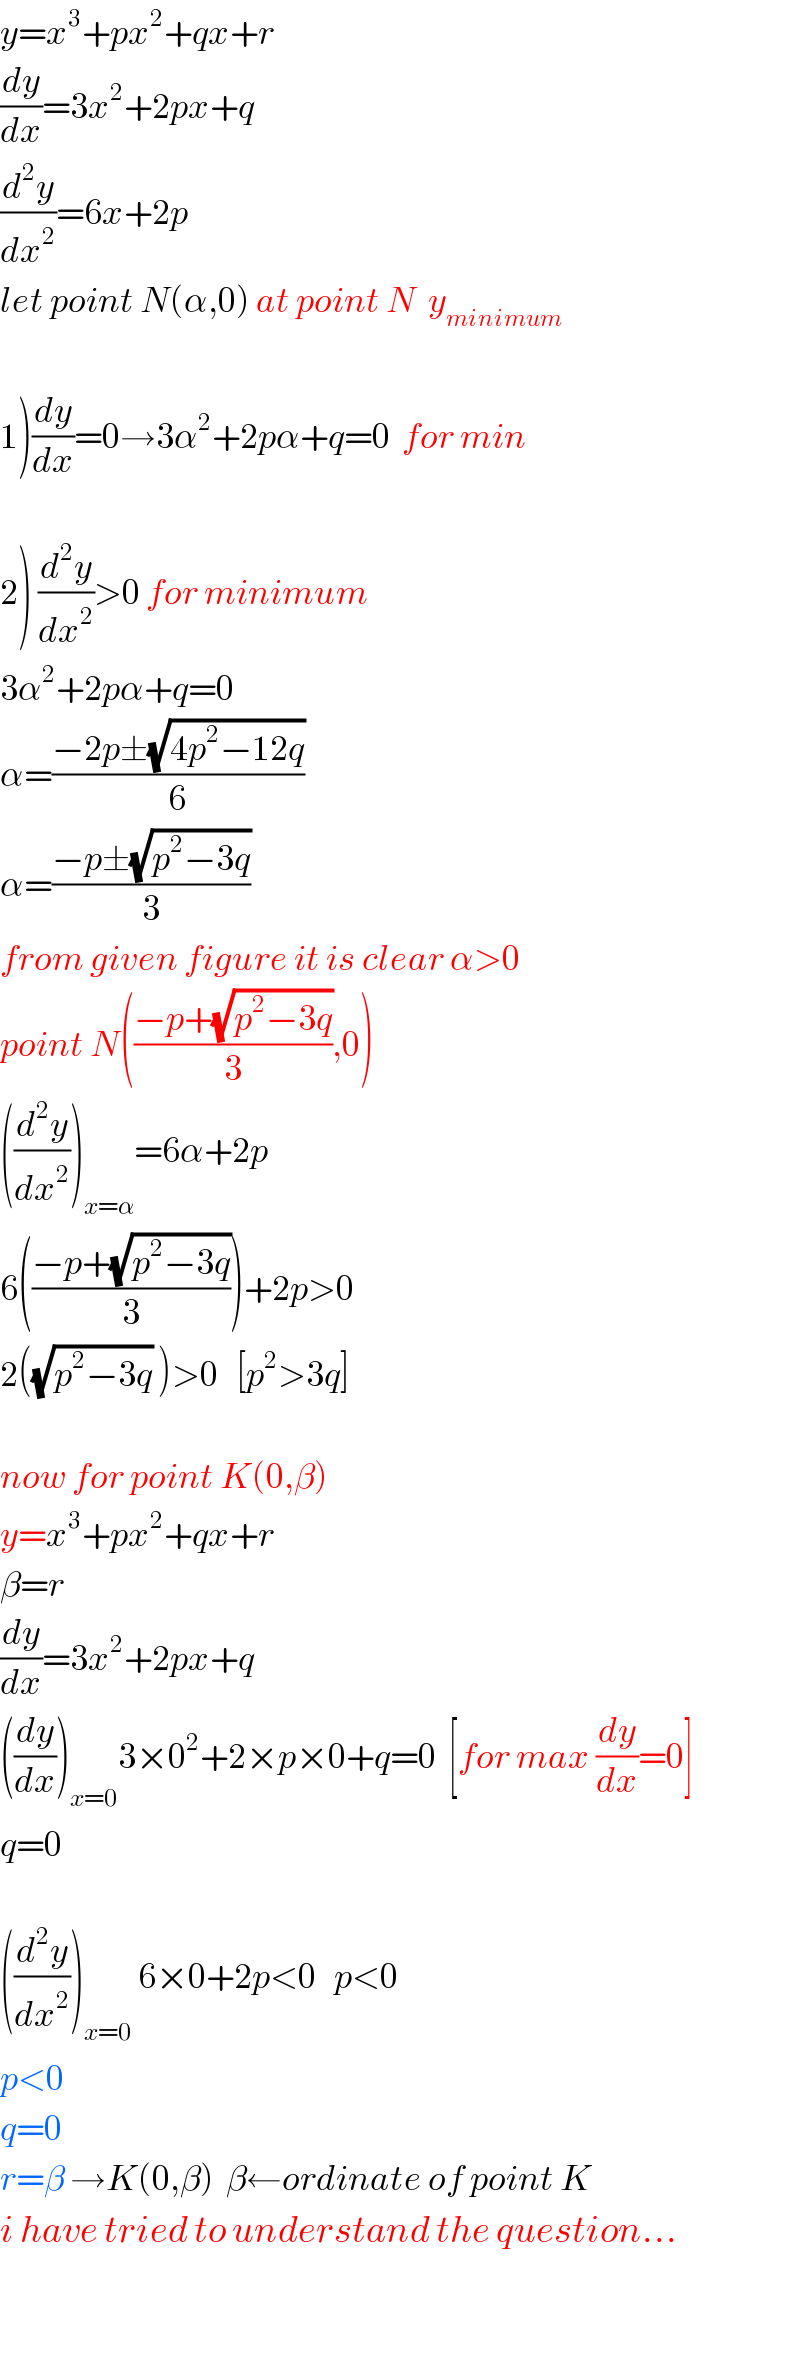 y=x^3 +px^2 +qx+r  (dy/dx)=3x^2 +2px+q  (d^2 y/dx^2 )=6x+2p  let point N(α,0) at point N  y_(minimum)     1)(dy/dx)=0→3α^2 +2pα+q=0  for min        2) (d^2 y/dx^2 )>0 for minimum   3α^2 +2pα+q=0  α=((−2p±(√(4p^2 −12q)))/6)  α=((−p±(√(p^2 −3q)))/3)  from given figure it is clear α>0  point N(((−p+(√(p^2 −3q)))/3),0)  ((d^2 y/dx^2 ))_(x=α) =6α+2p  6(((−p+(√(p^2 −3q)))/3))+2p>0  2((√(p^2 −3q)) )>0   [p^2 >3q]    now for point K(0,β)  y=x^3 +px^2 +qx+r  β=r  (dy/dx)=3x^2 +2px+q  ((dy/dx))_(x=0) 3×0^2 +2×p×0+q=0  [for max (dy/dx)=0]  q=0    ((d^2 y/dx^2 ))_(x=0)  6×0+2p<0   p<0  p<0  q=0  r=β →K(0,β)  β←ordinate of point K  i have tried to understand the question...    